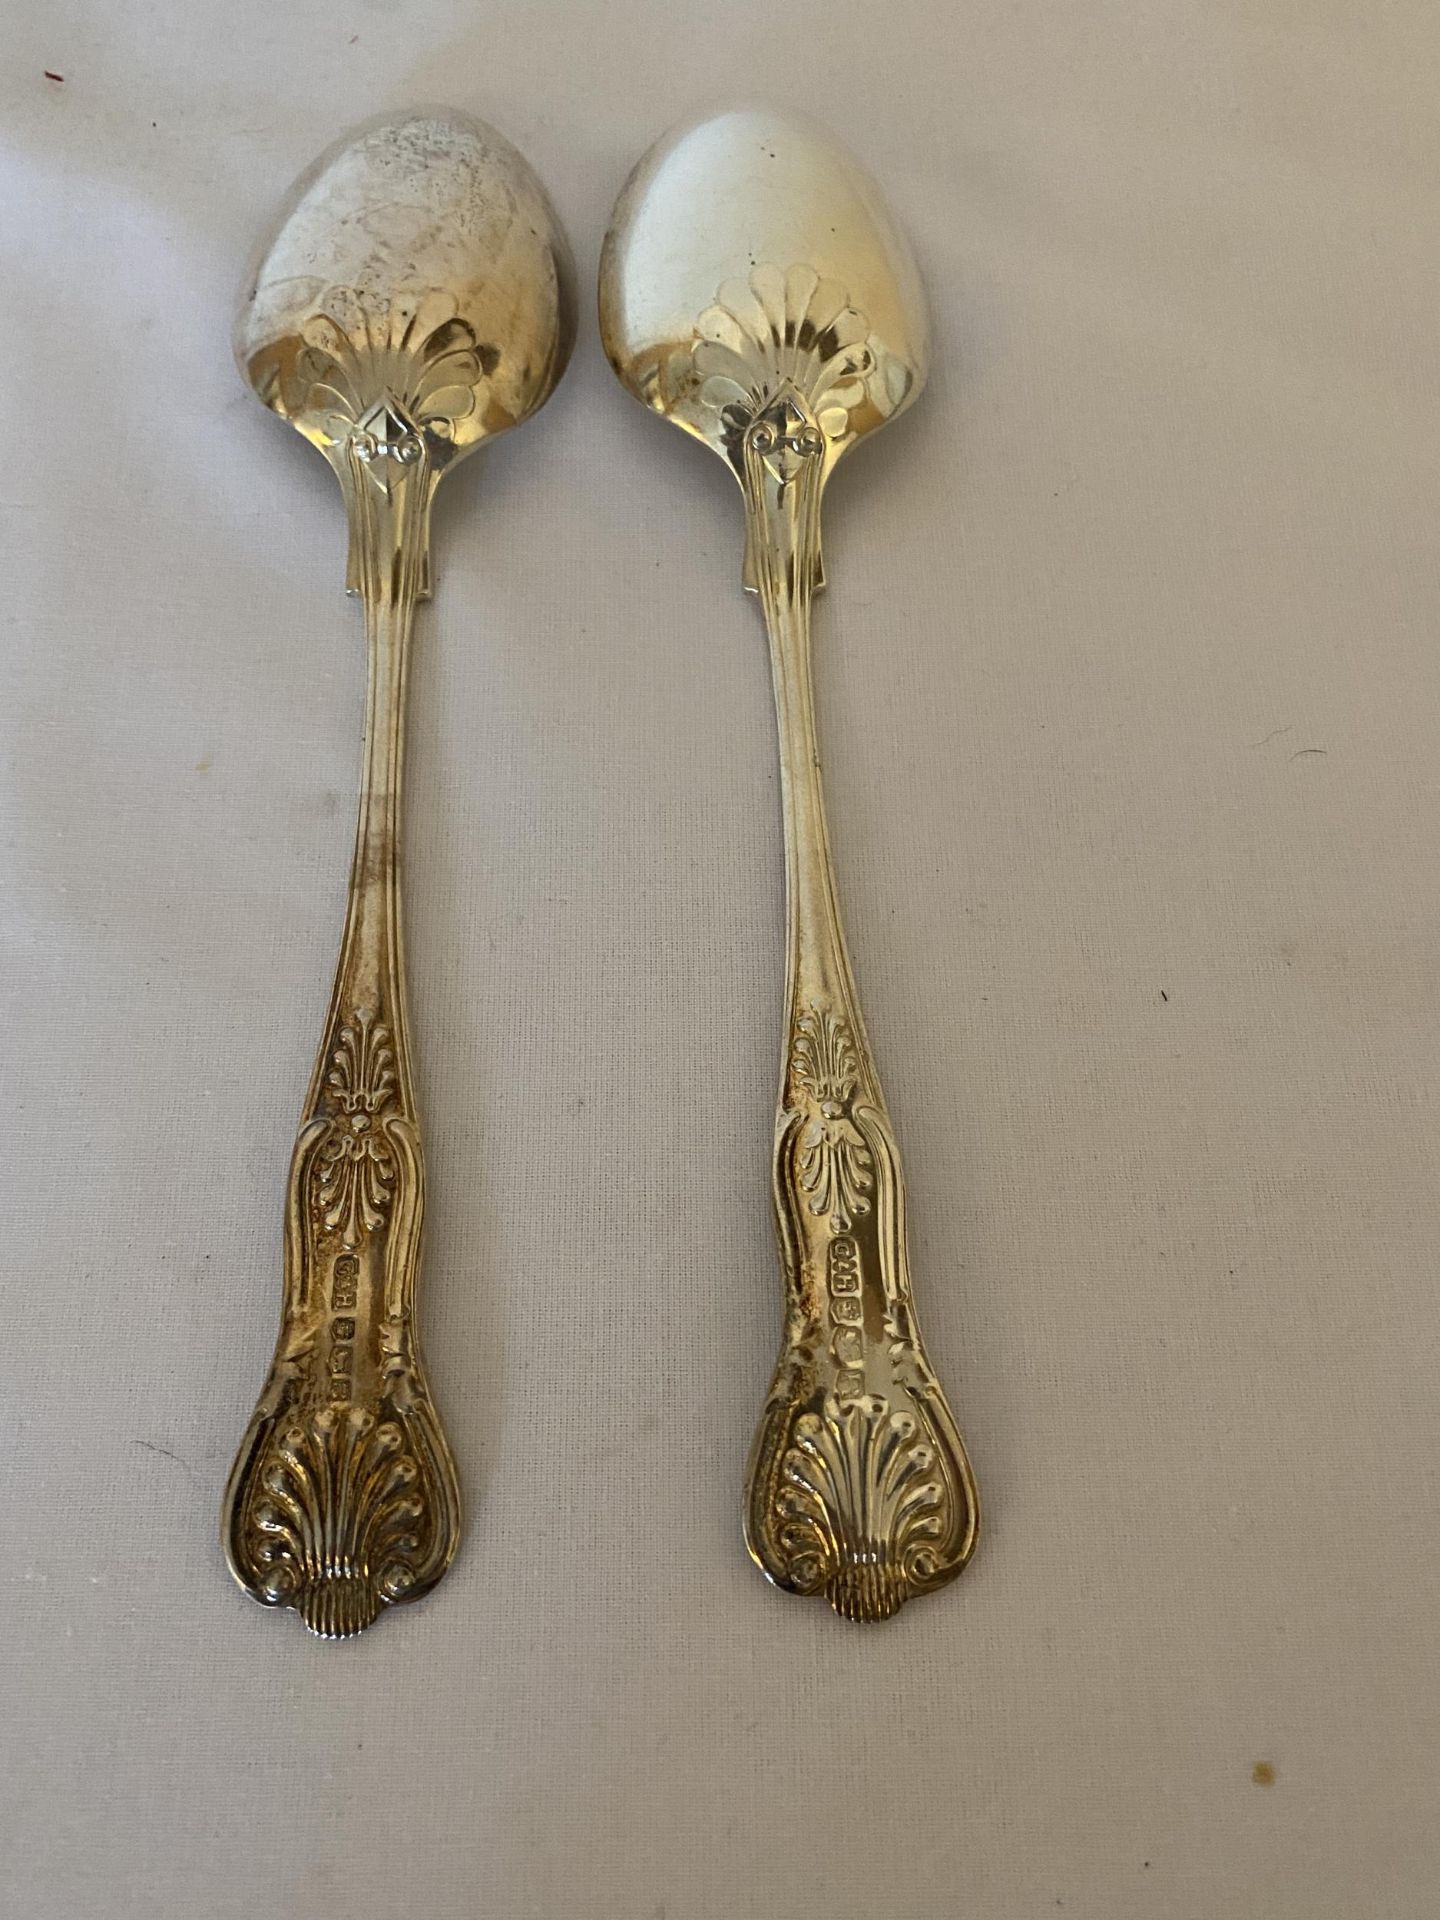 A PAIR OF ELIZABETH II 1959 HALLMARKED SHEFFIELD SILVER SPOONS, MAKER GEE & HOLMES, GROSS WEIGHT 187 - Image 7 of 15